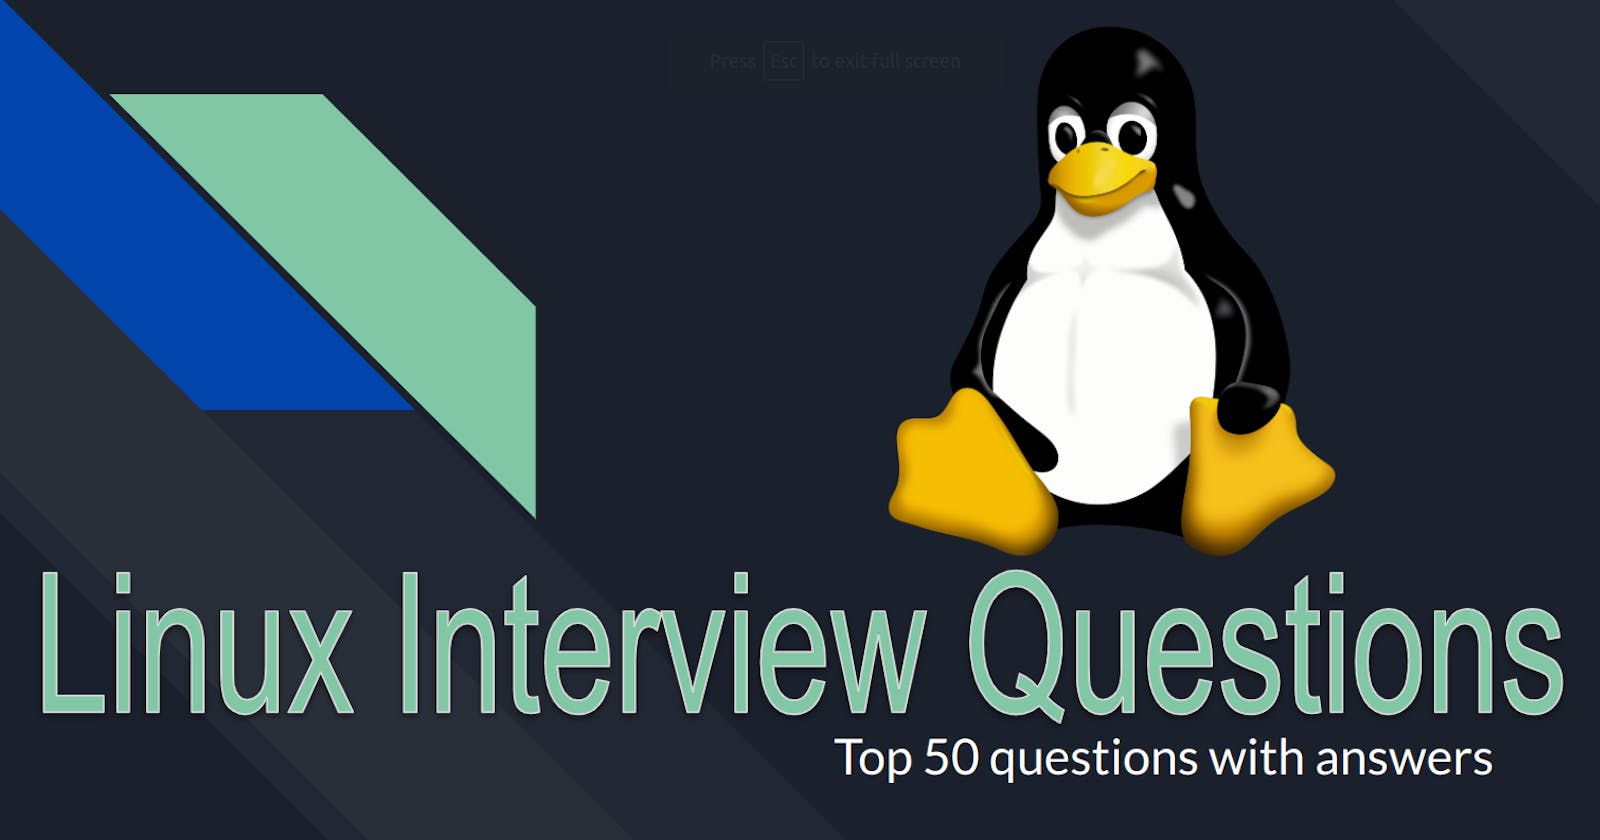 Day 82: Linux Interview Questions